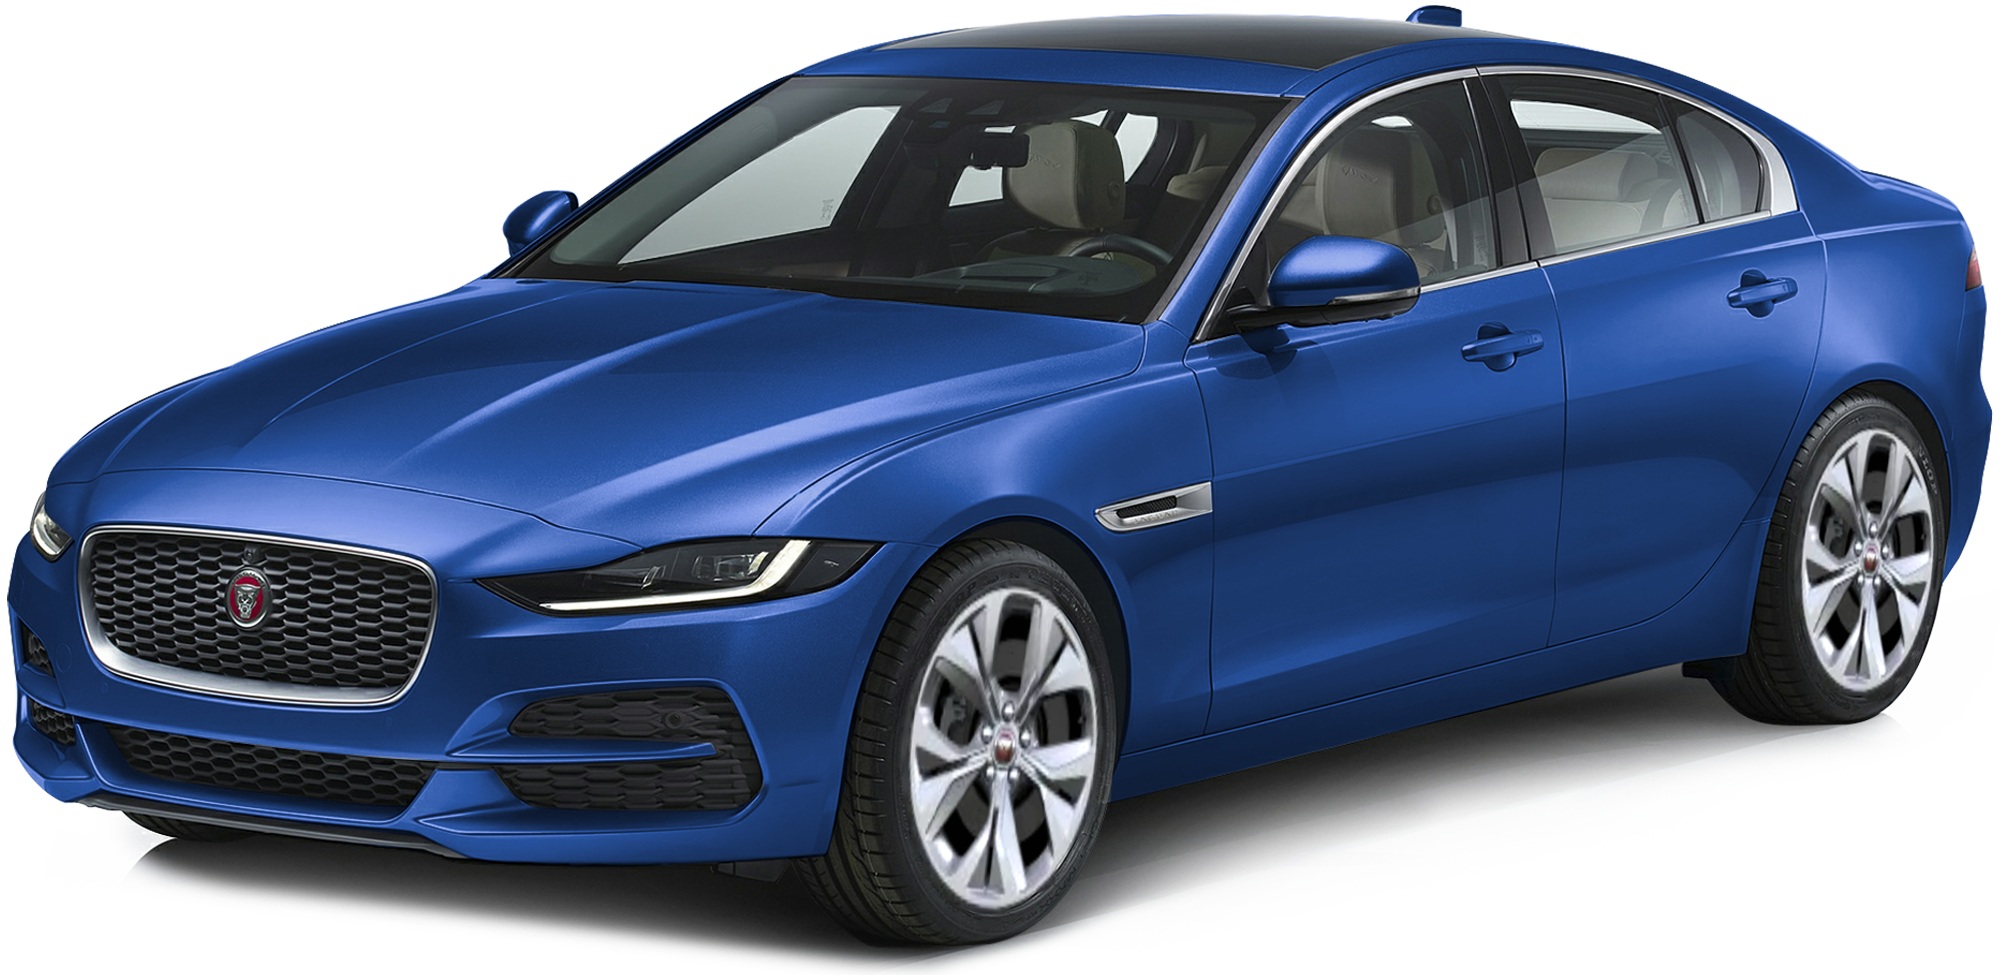 2020 Jaguar XE Incentives, Specials & Offers in Fife WA